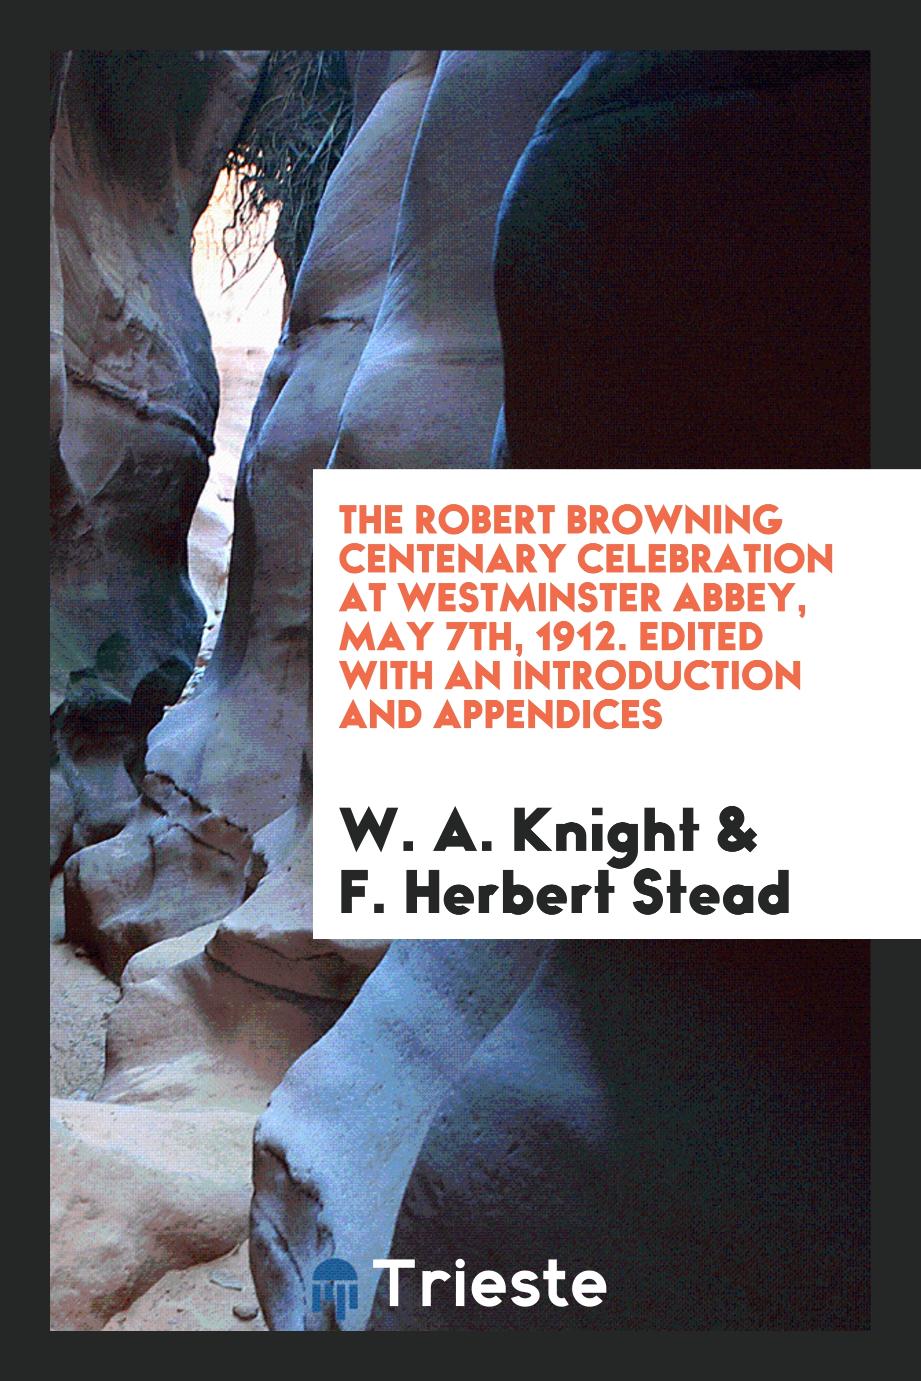 The Robert Browning centenary celebration at Westminster Abbey, May 7th, 1912. Edited with an introduction and appendices